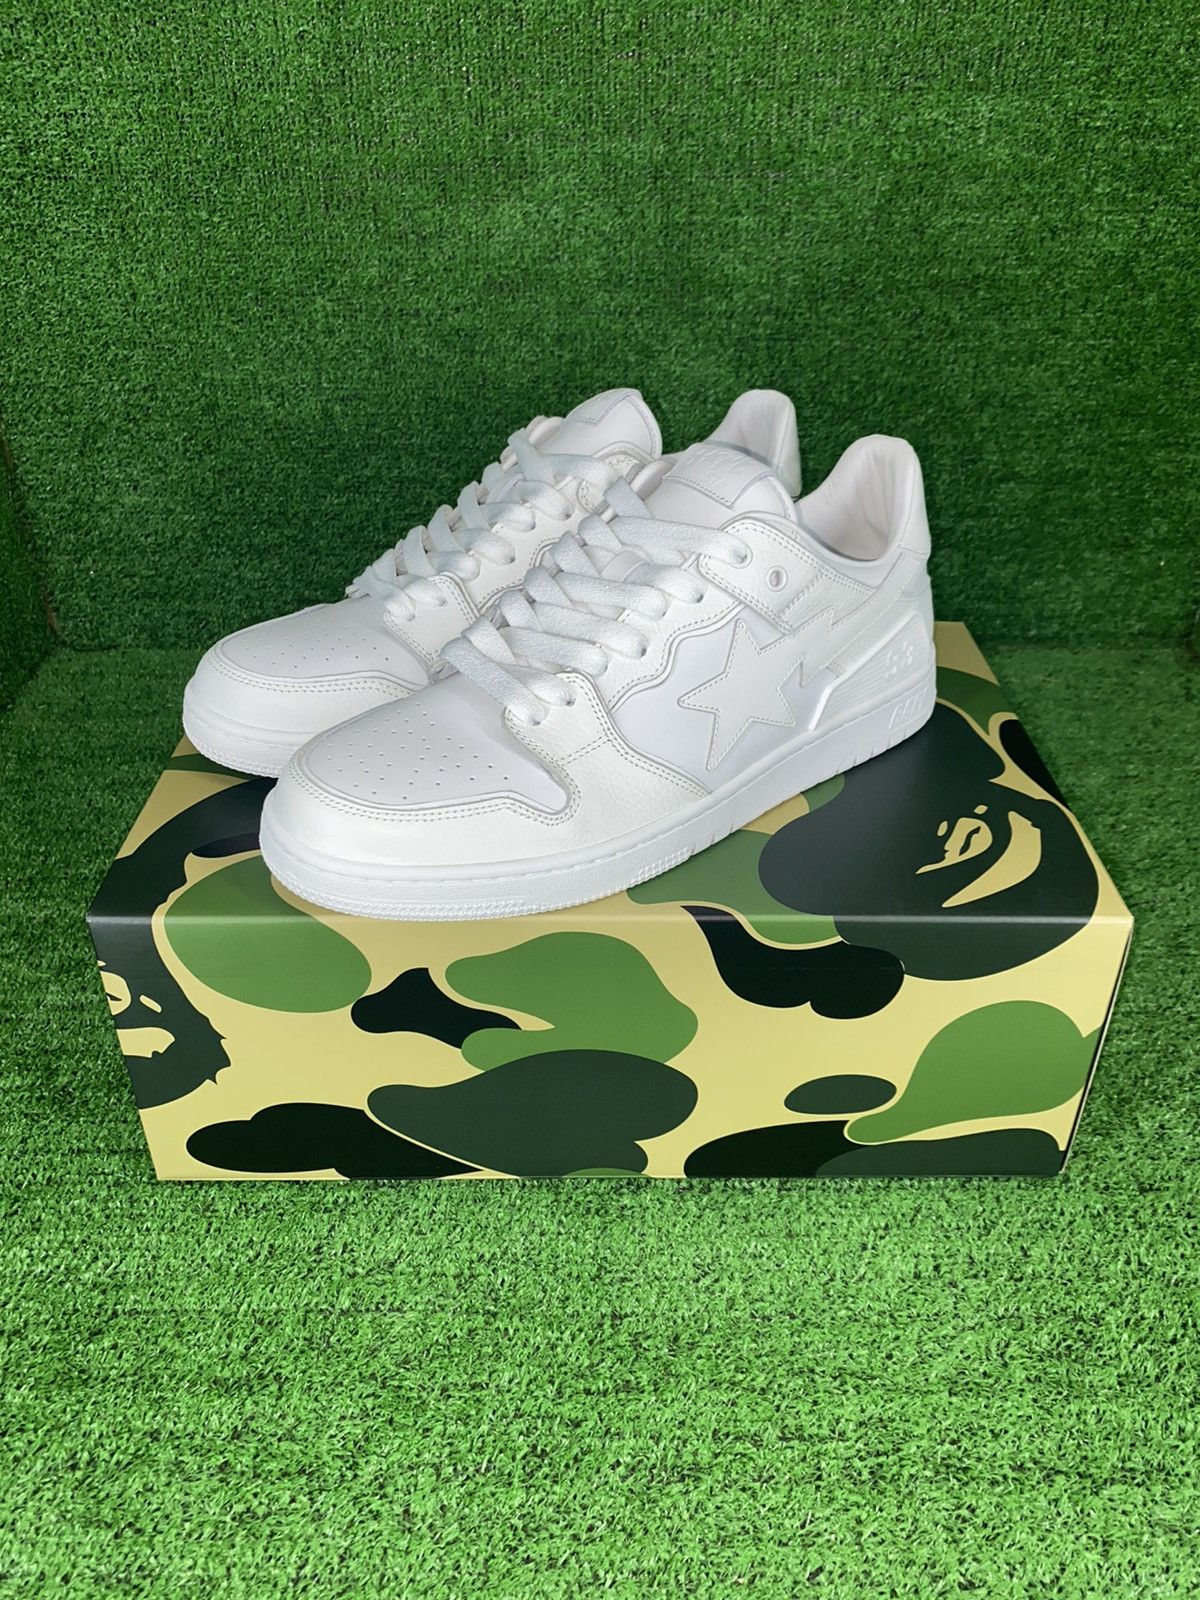 Pre-owned Bape Sk8 Sta 3 White Size 9 Shoes